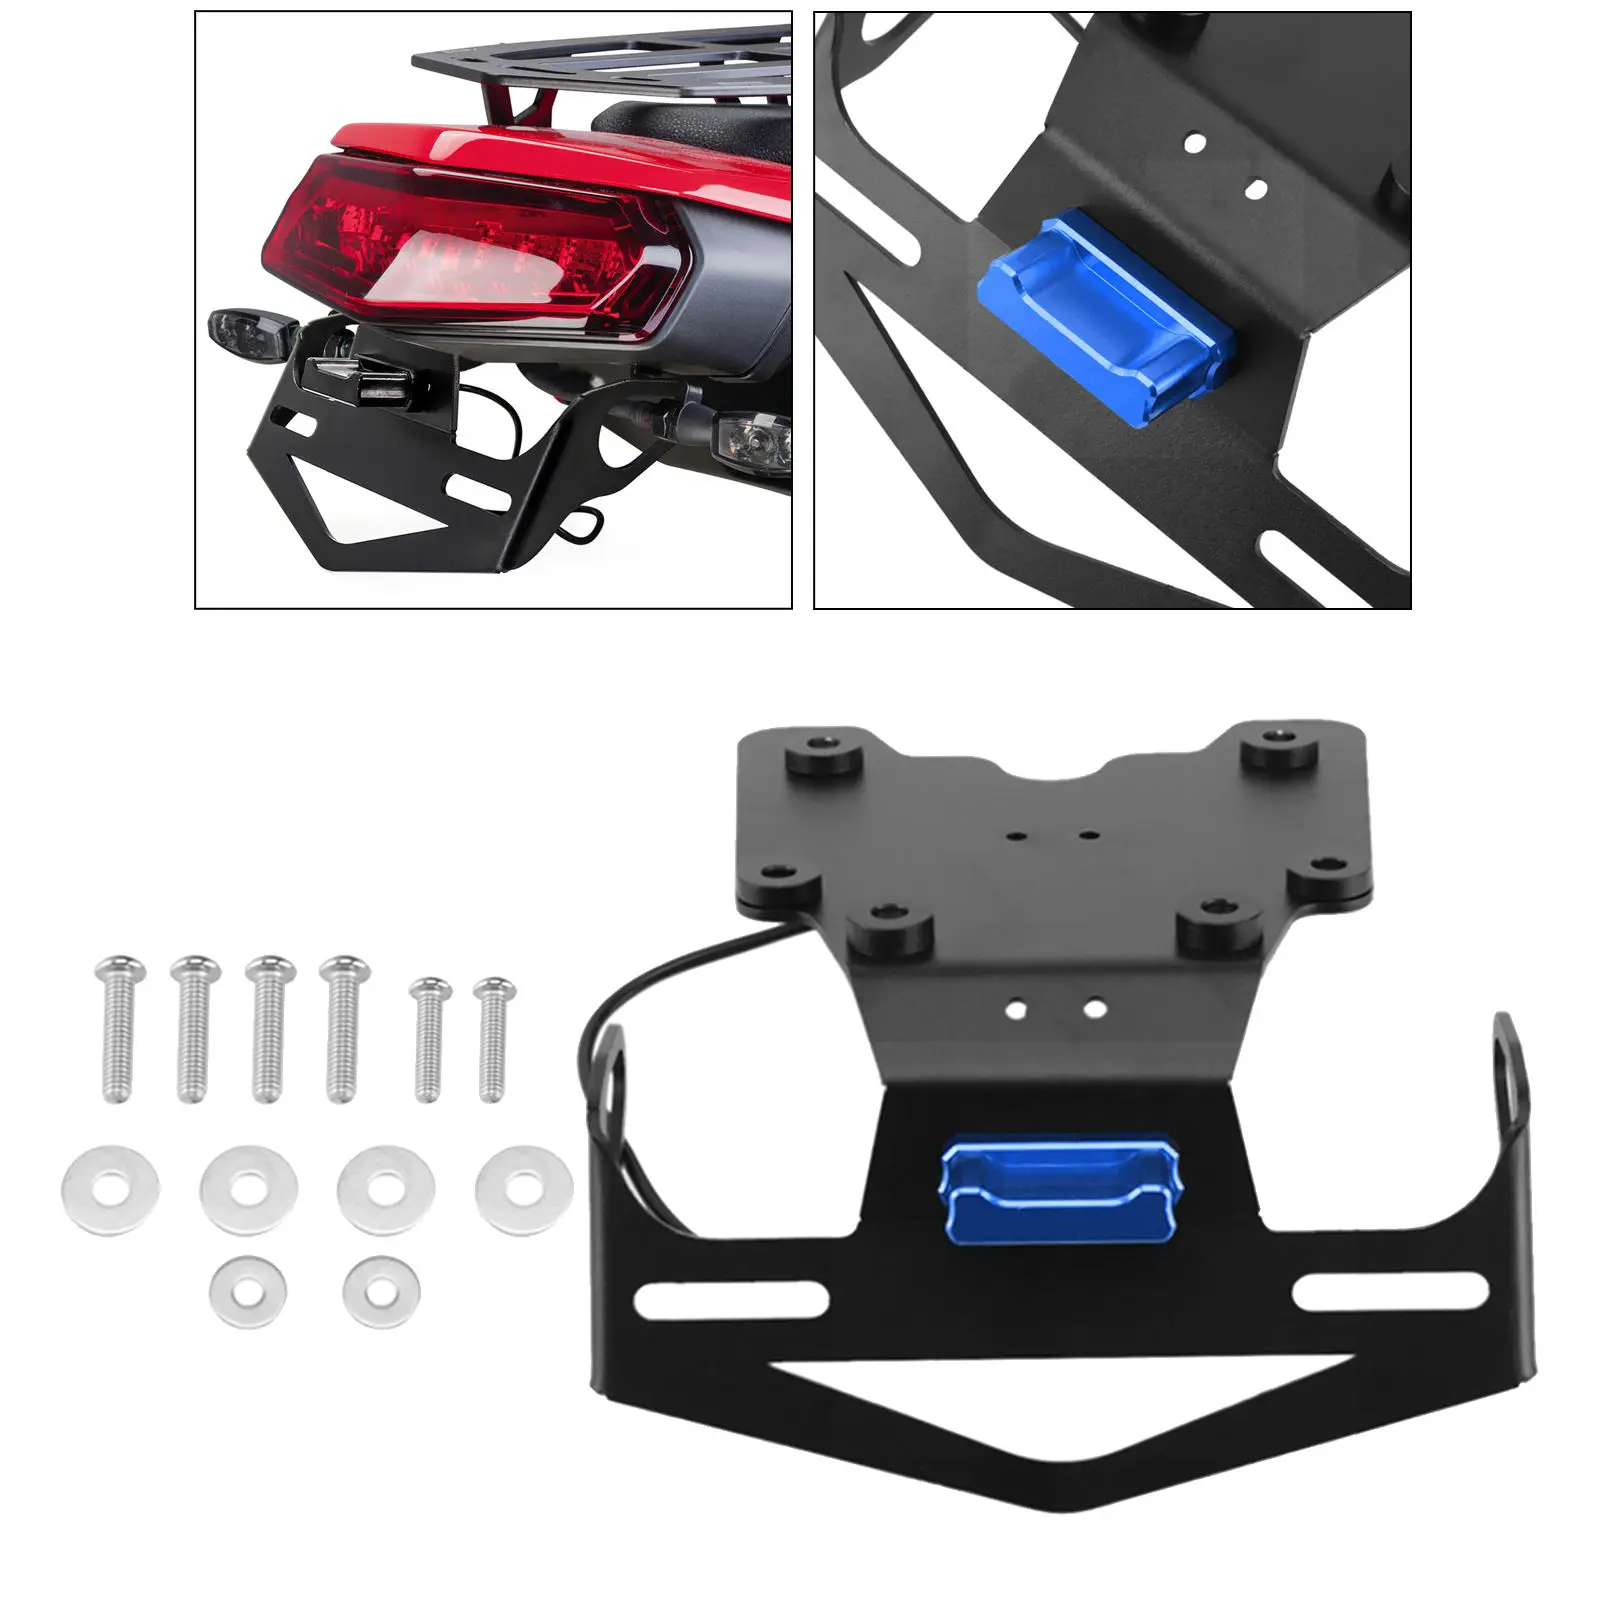 New Motorbike Motorcycle License Plate Holder Mount Bracket Assembly Fits for Yamaha Tenere 700 2019 2020 2021